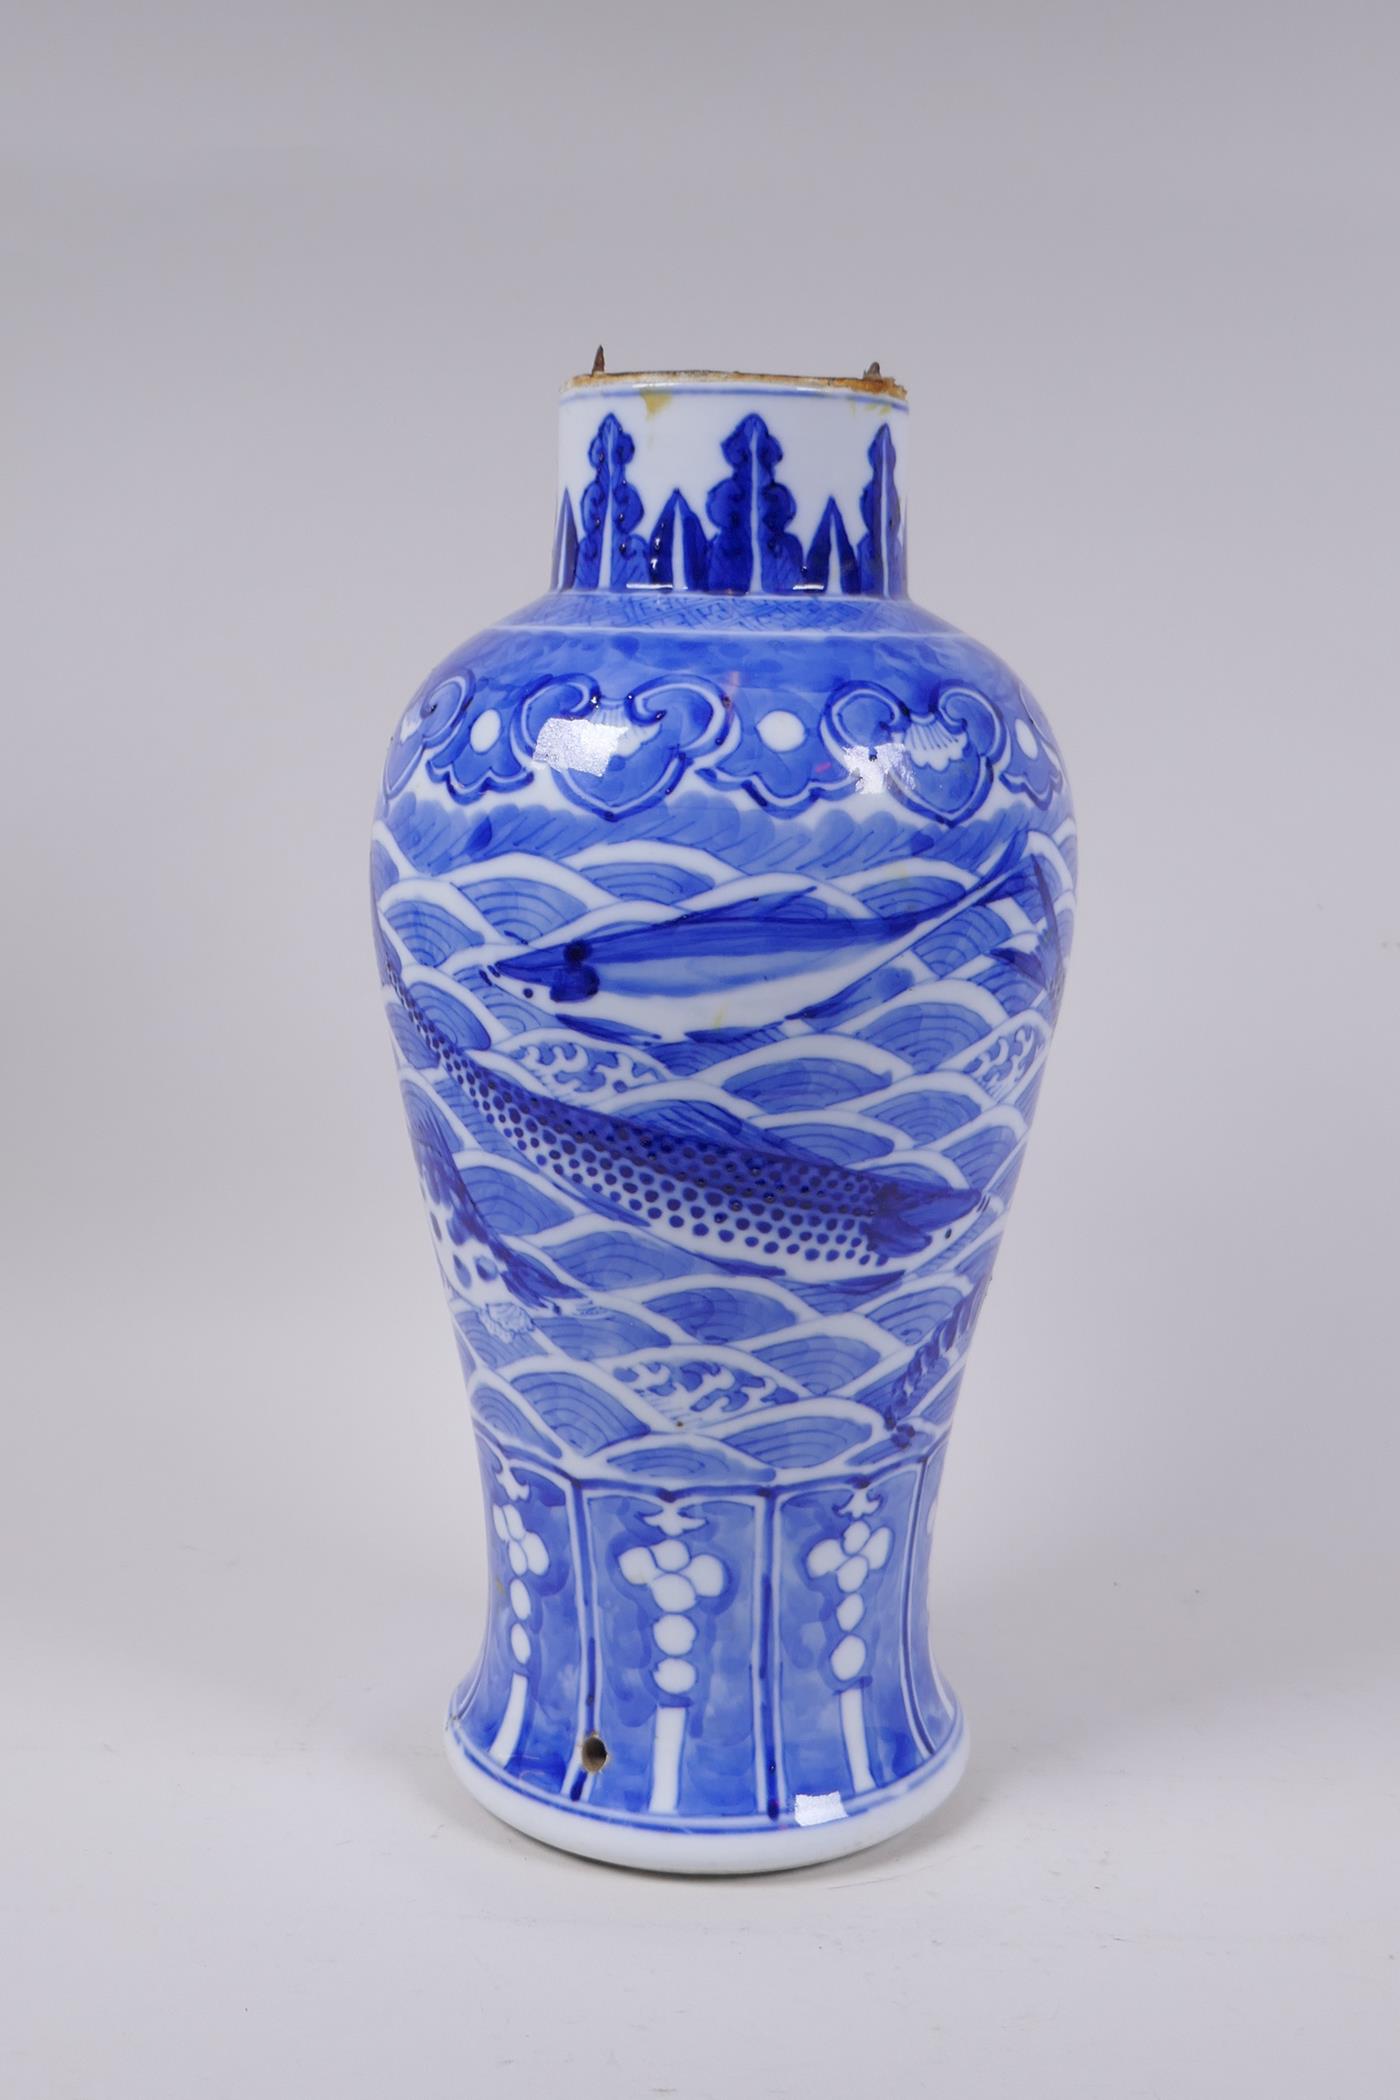 A C19th Chinese blue and white porcelain vase decorated with carp and crabs, Xuande 4 character mark - Image 4 of 9